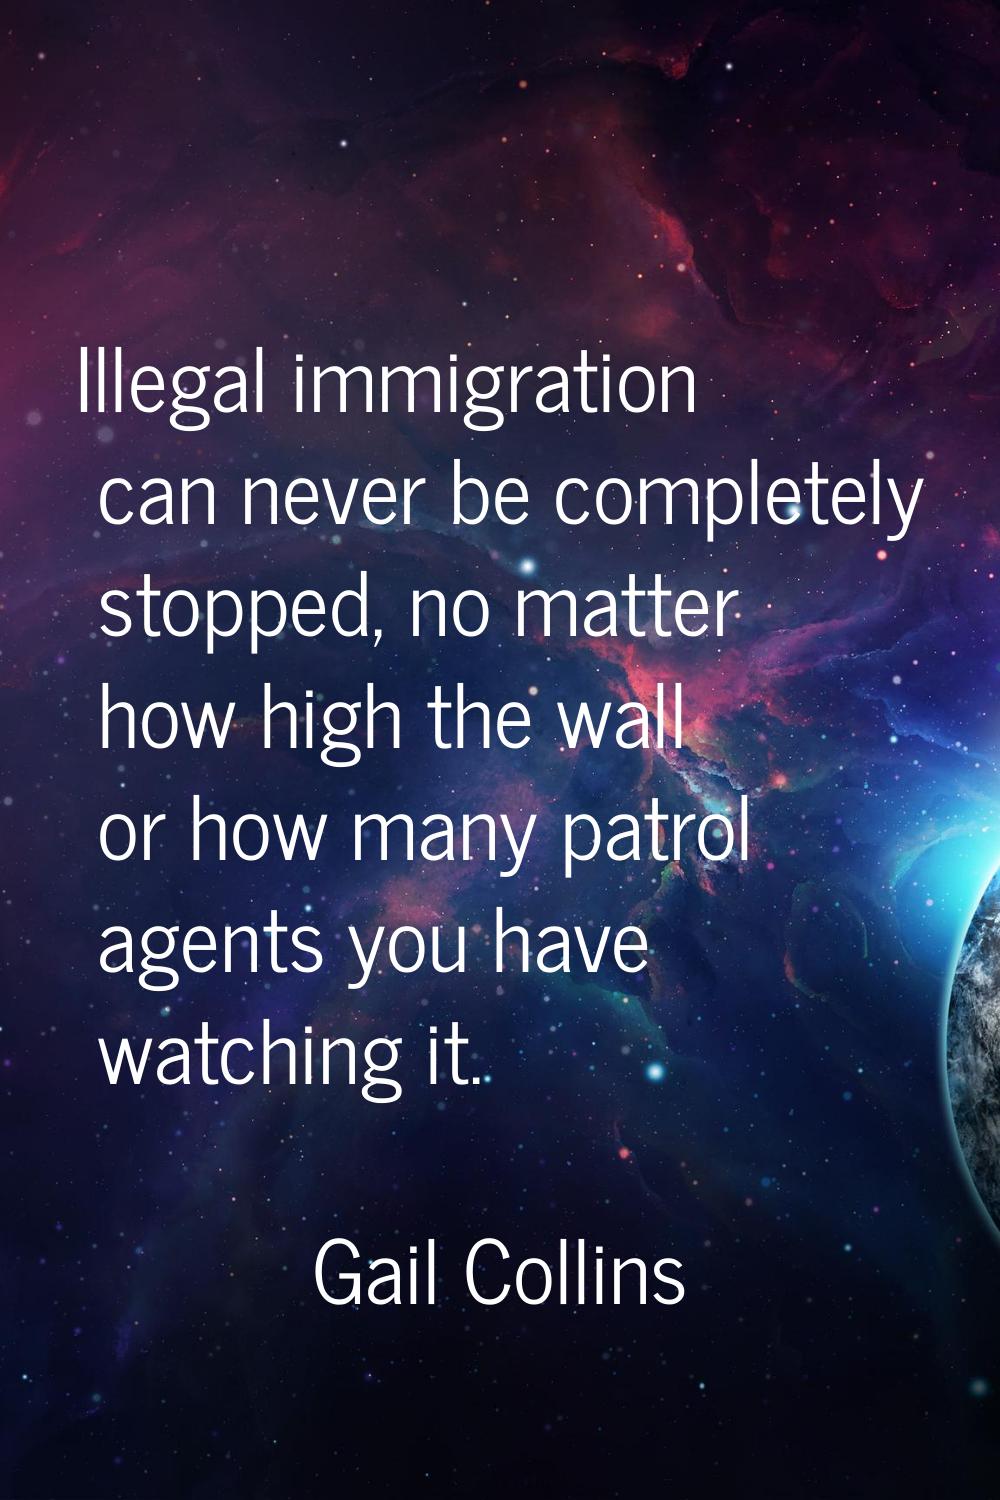 Illegal immigration can never be completely stopped, no matter how high the wall or how many patrol